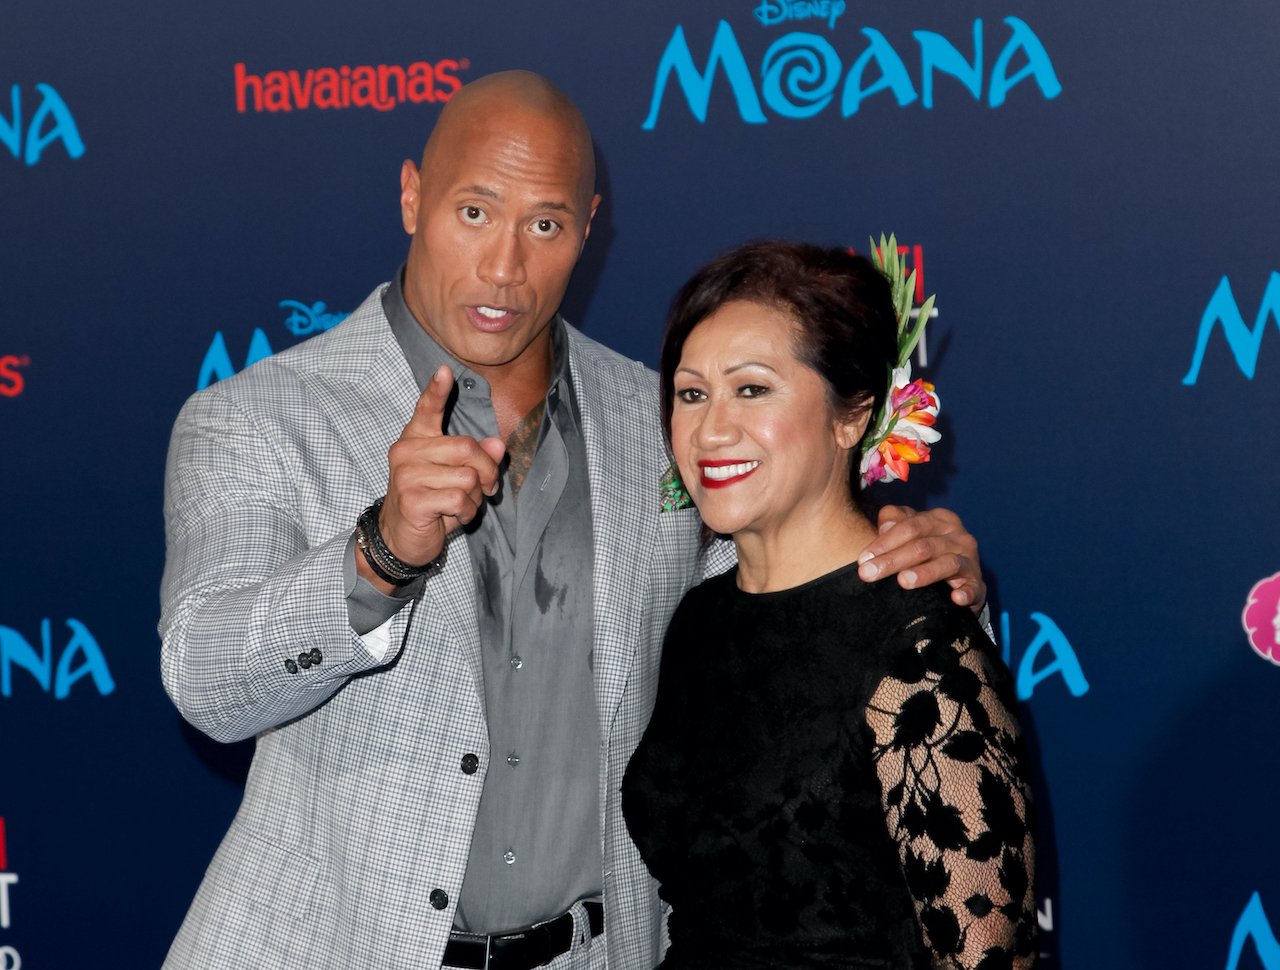 Dwayne Johnson and his mother, Ata Johnson, attend the premiere of Disney's 'Moana'